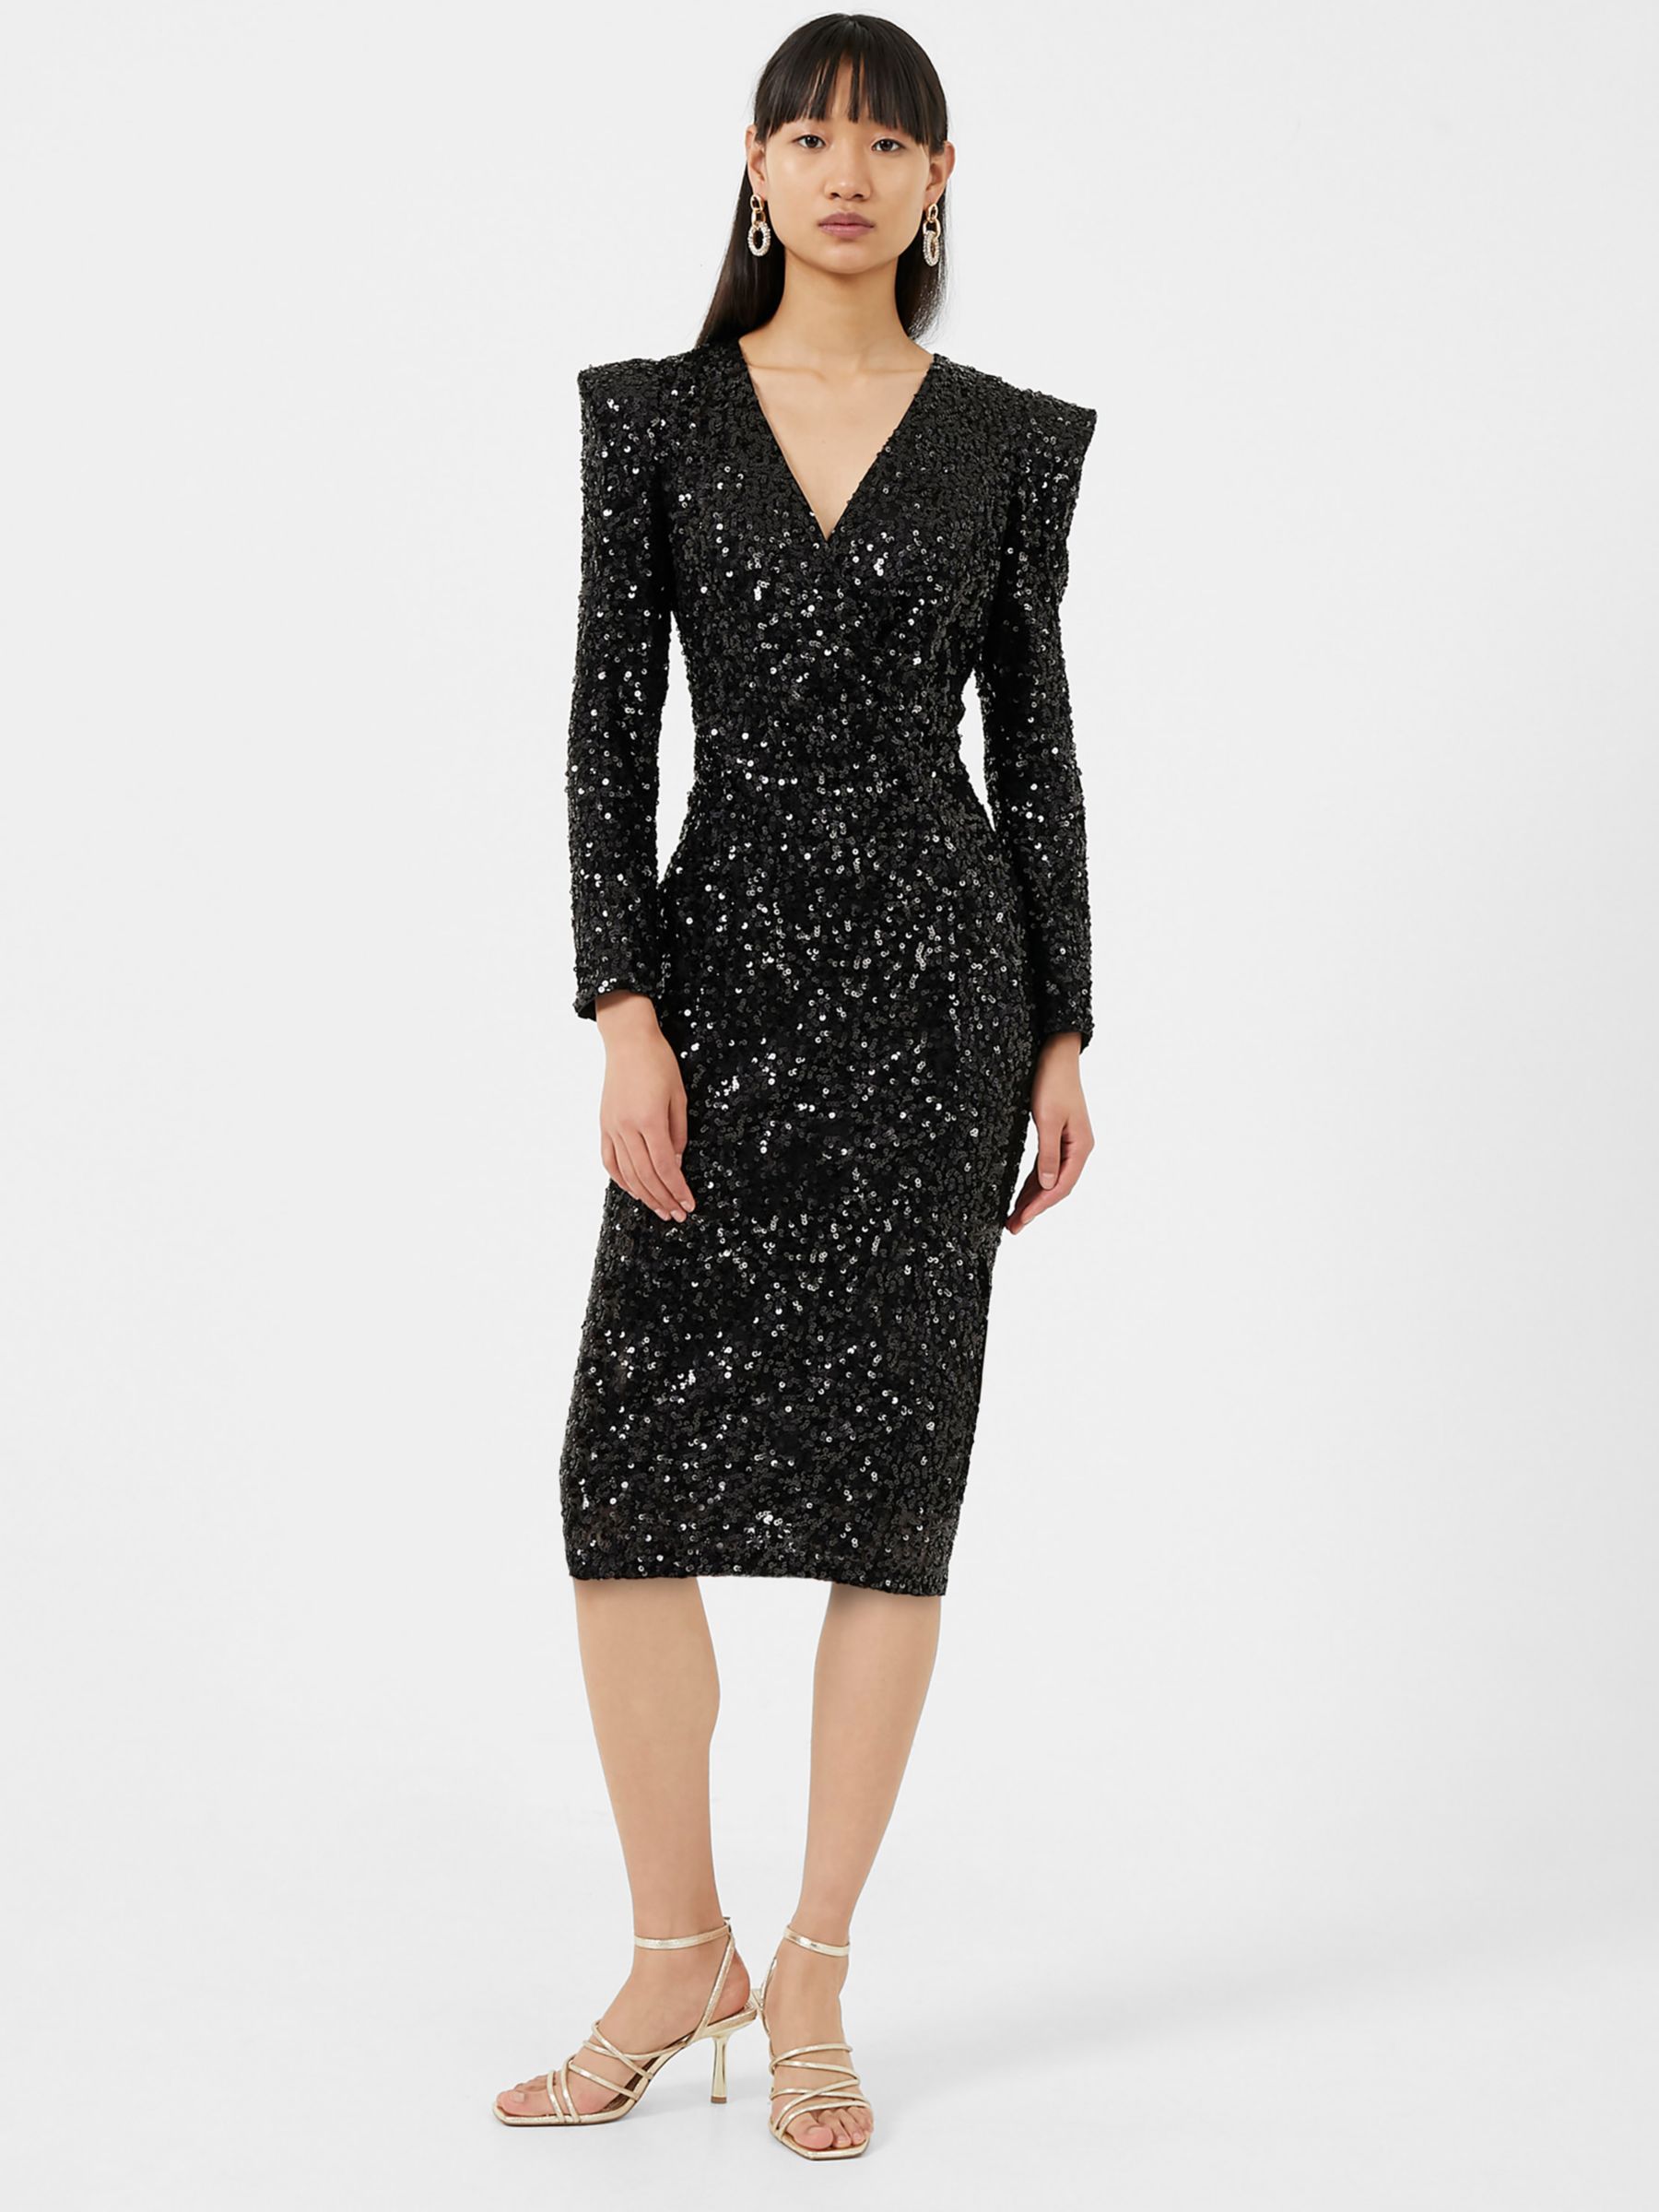 French Connection Samantha Sequin Dress, Black